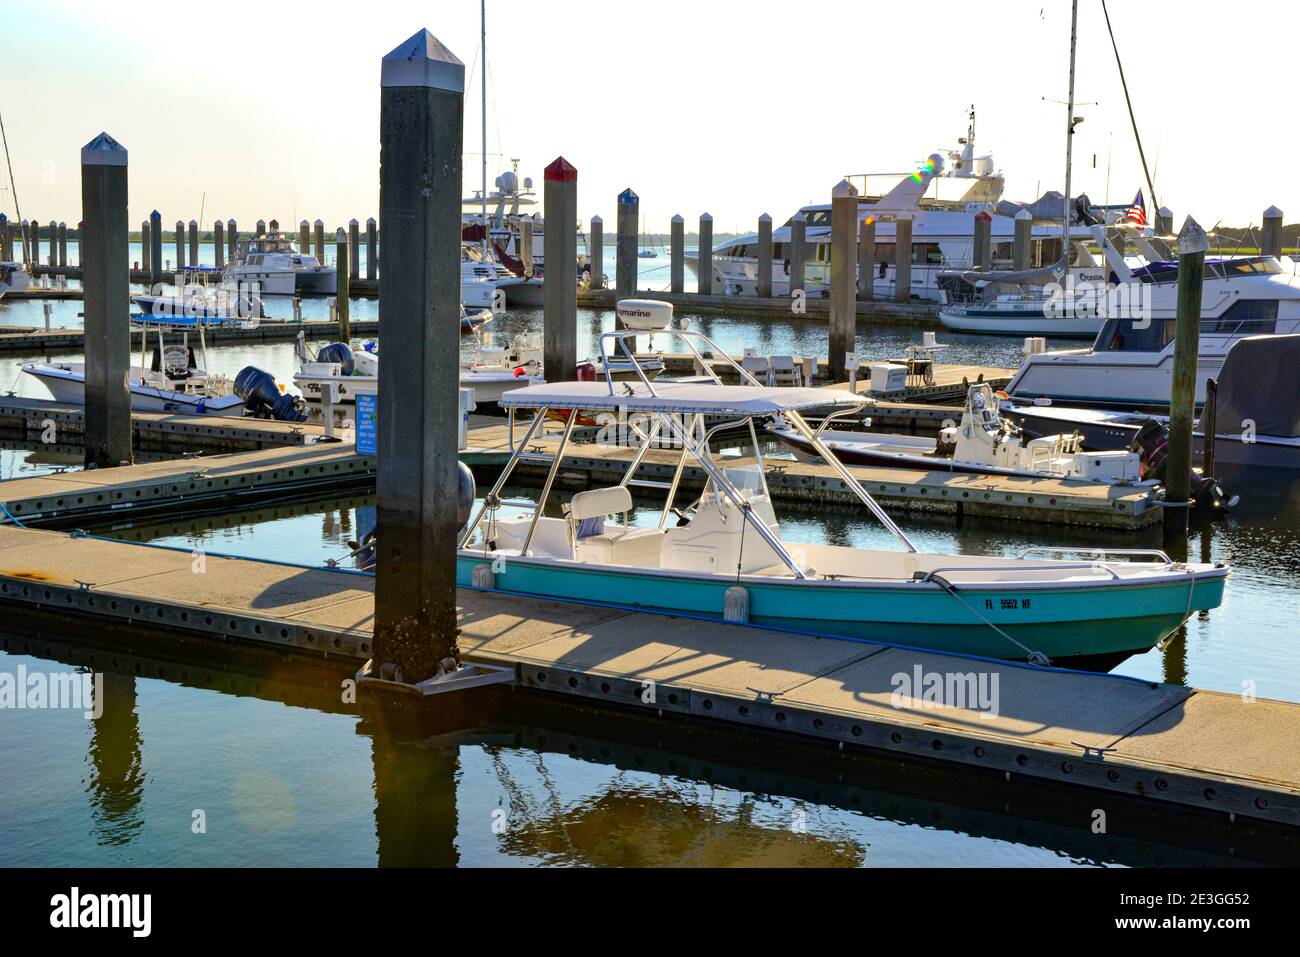 View from a deck of Floating concrete docks accommodating yachts, sailboats and motorboats at the Oasis Marina at Fernandina Harbor, Amelia Island, FL Stock Photo